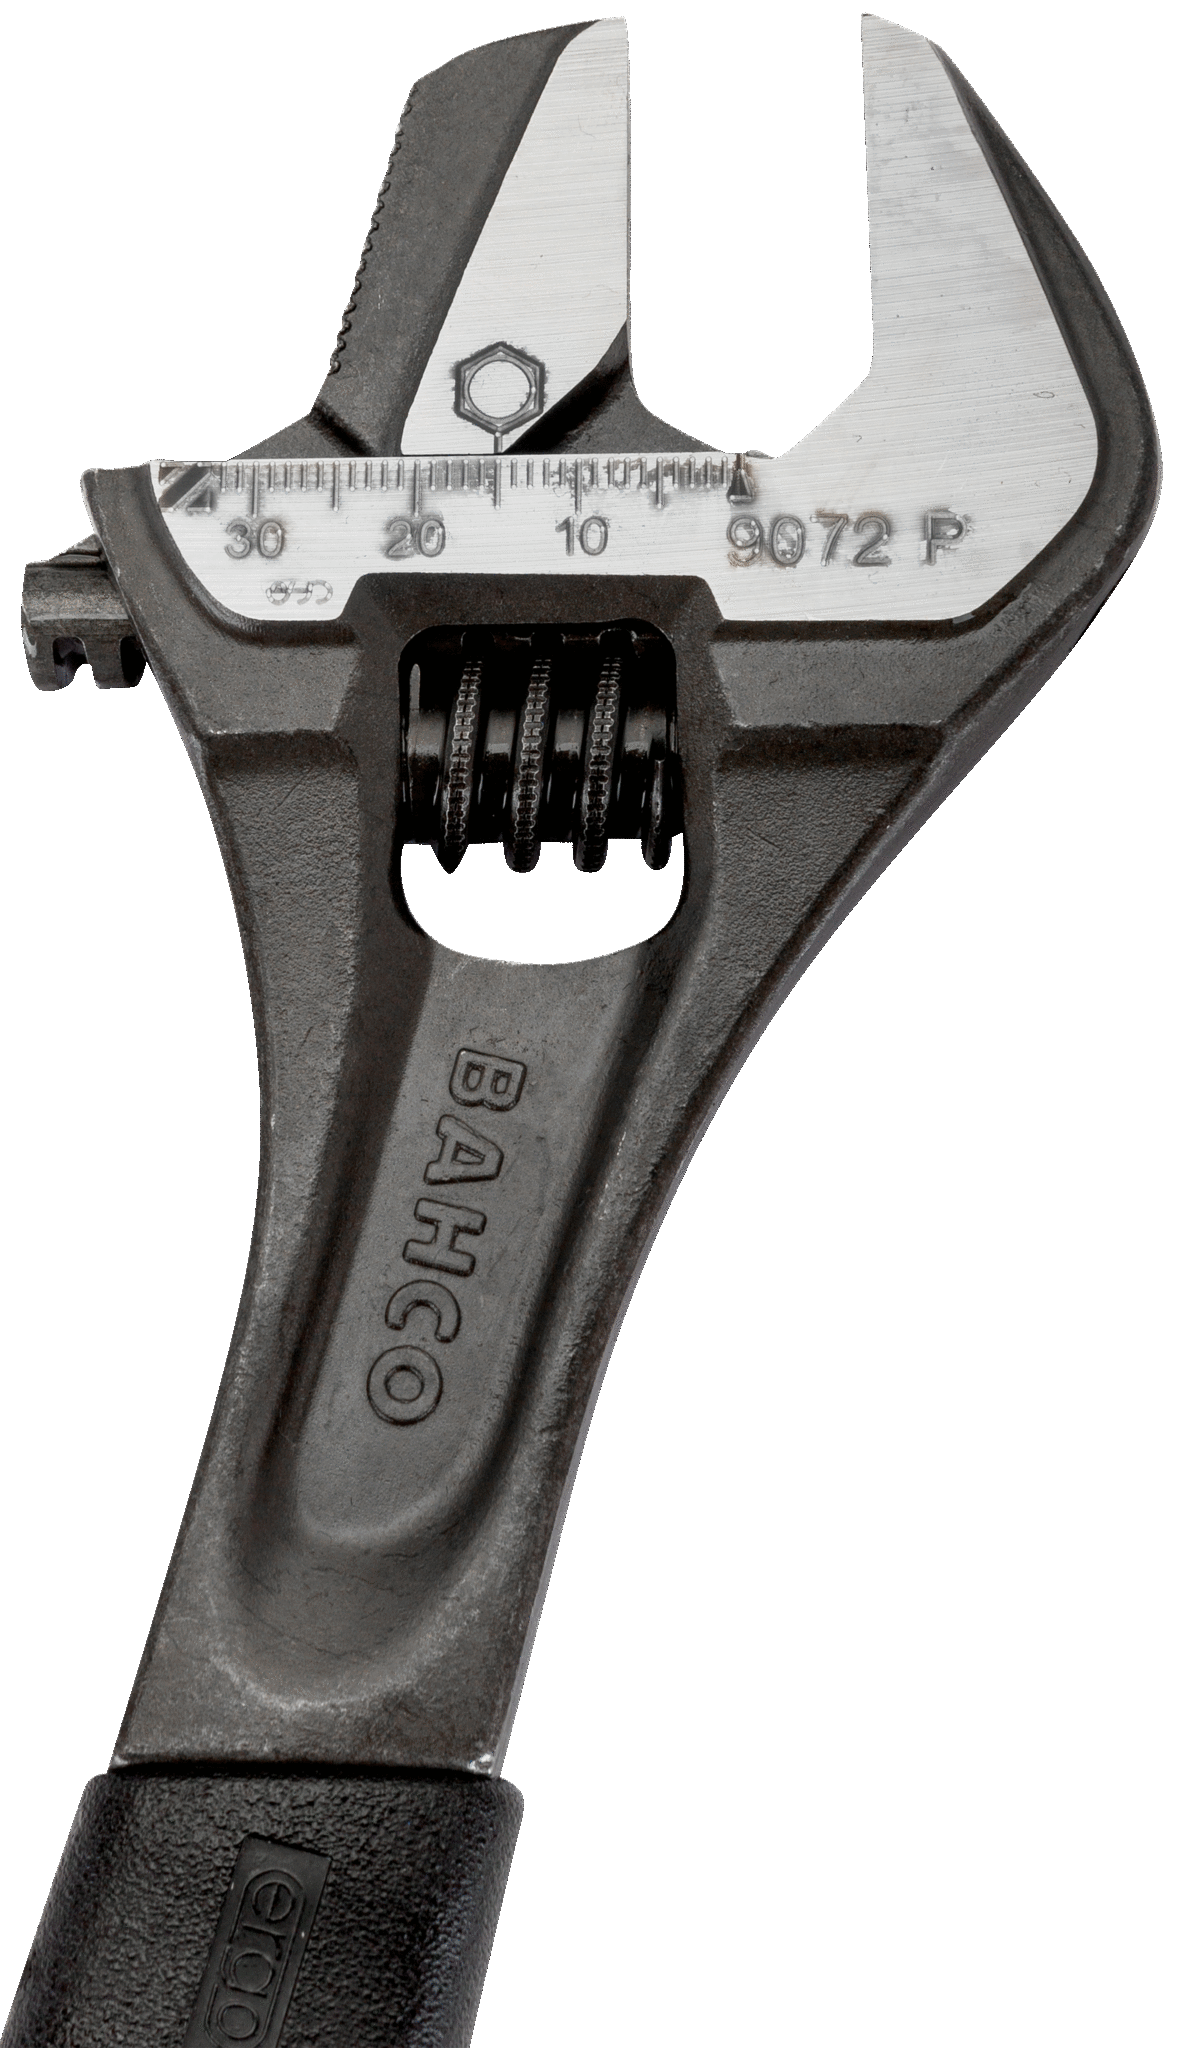 ERGO™ rubber handle central nut phosphated adjustable wrench, with reversible jaw - 9072 P by Bahco